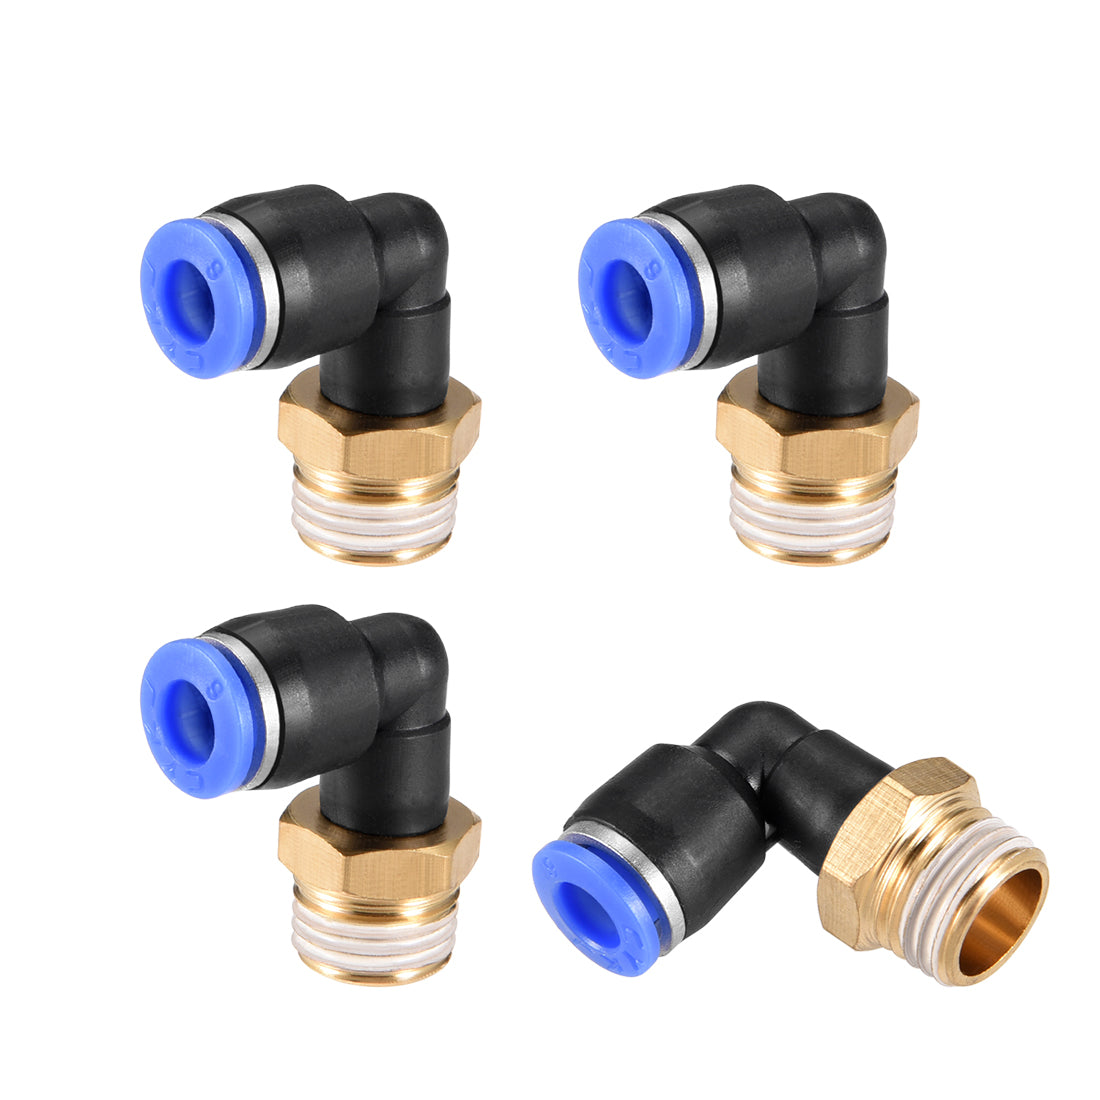 Uxcell Uxcell PL6-02 Pneumatic Push to Connect Fitting, Male Elbow - 15/64" Tube OD x 1/4" G Thread Tube Fitting Blue 4pcs